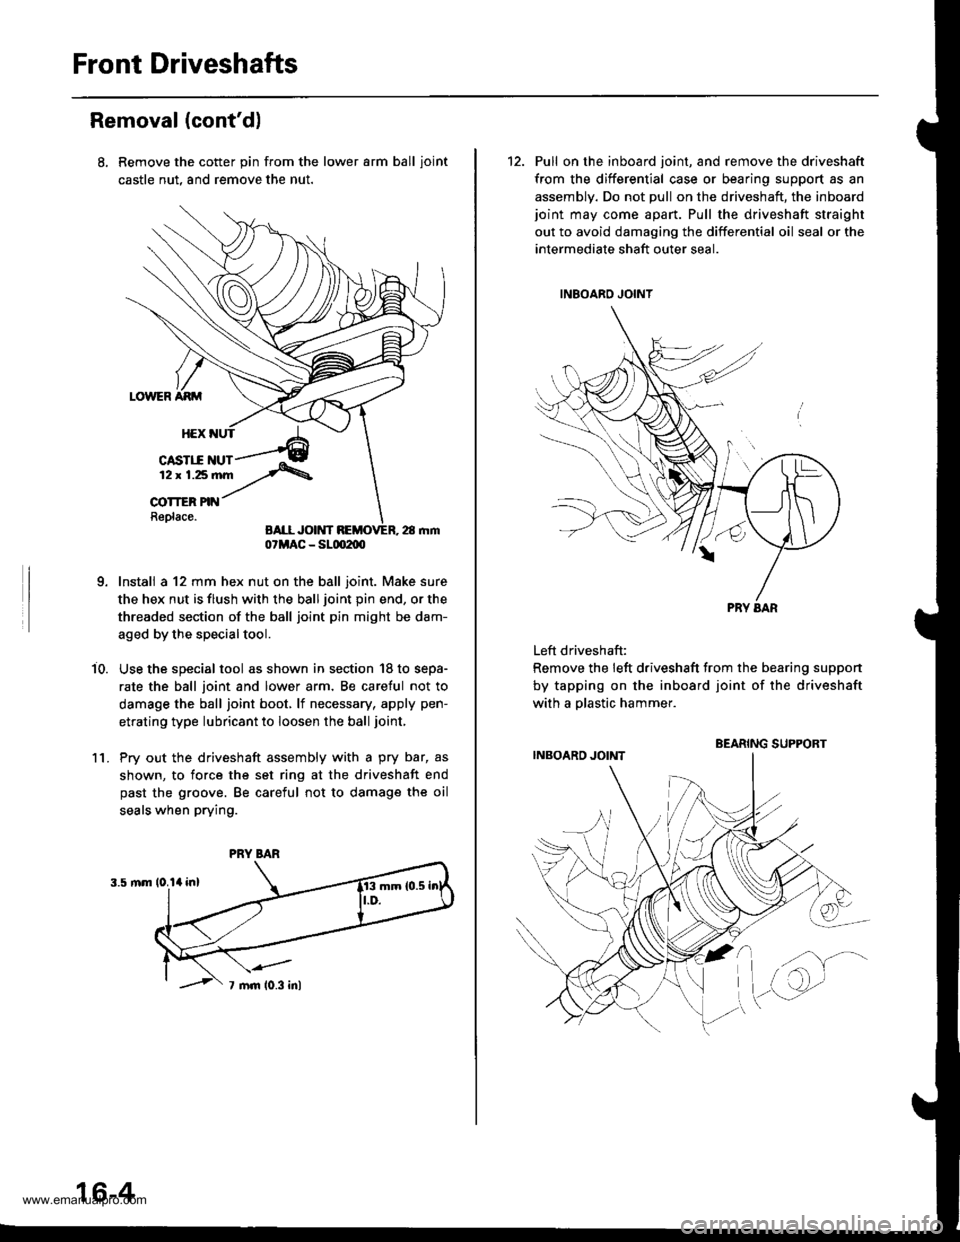 HONDA CR-V 1997 RD1-RD3 / 1.G Workshop Manual 
Front Driveshafts
Removal (contd)
Remove the cotter pin from the lower arm ball ioint
castle nut, and remove the nut.
Install a 12 mm hex nut on the ball joint. Make sure
the hex nut is flush with t